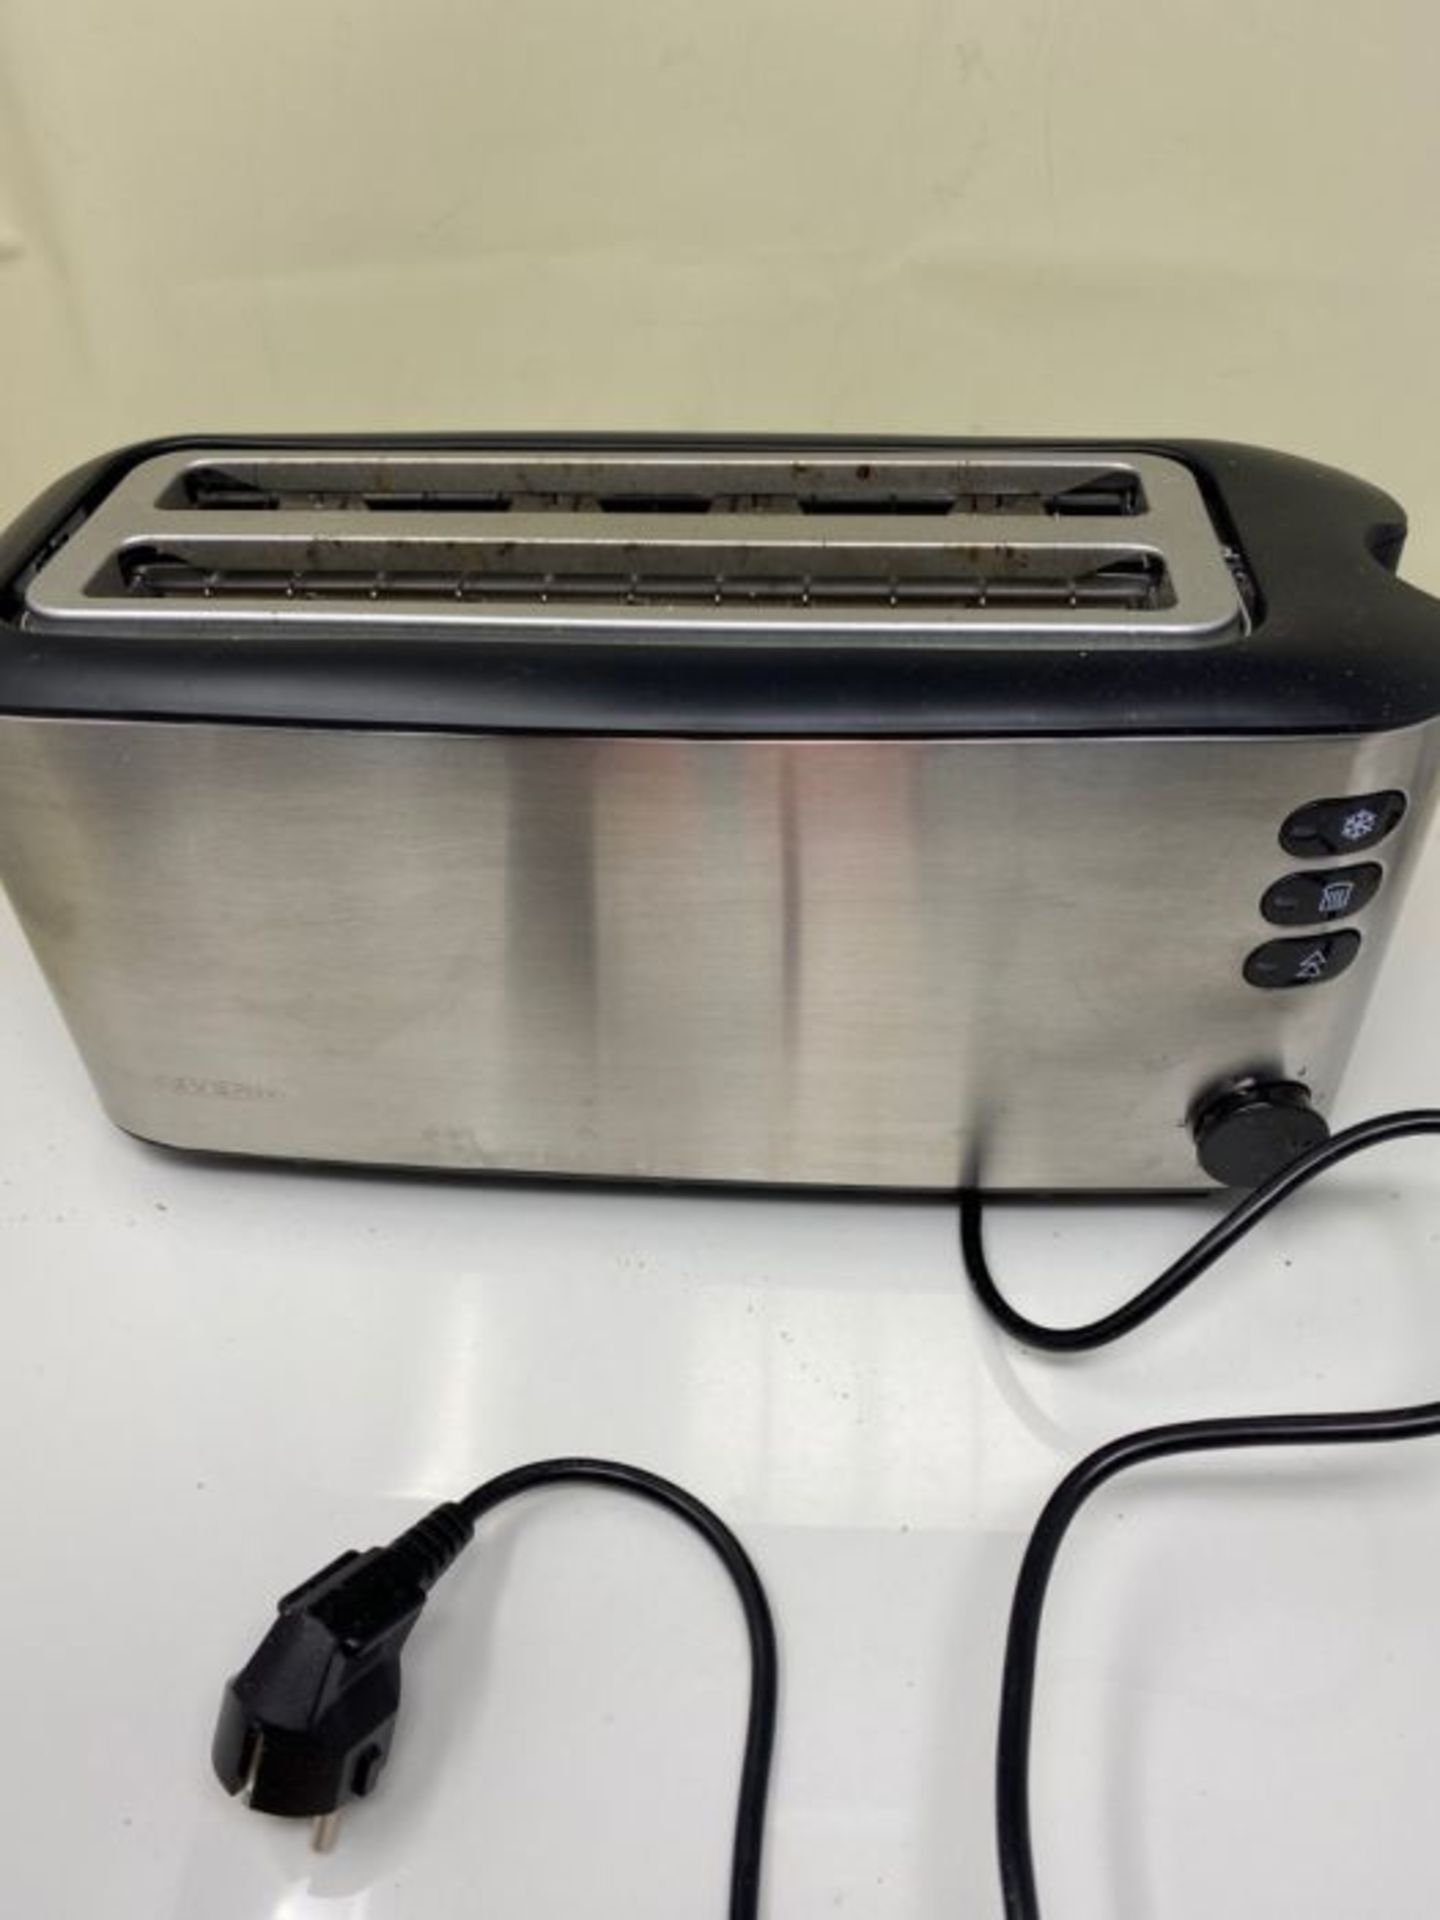 Severin 2509 Automatic 4-Slice Long Slot Toaster, 1400 W, Stainless Steel-Black Chambe - Image 3 of 3